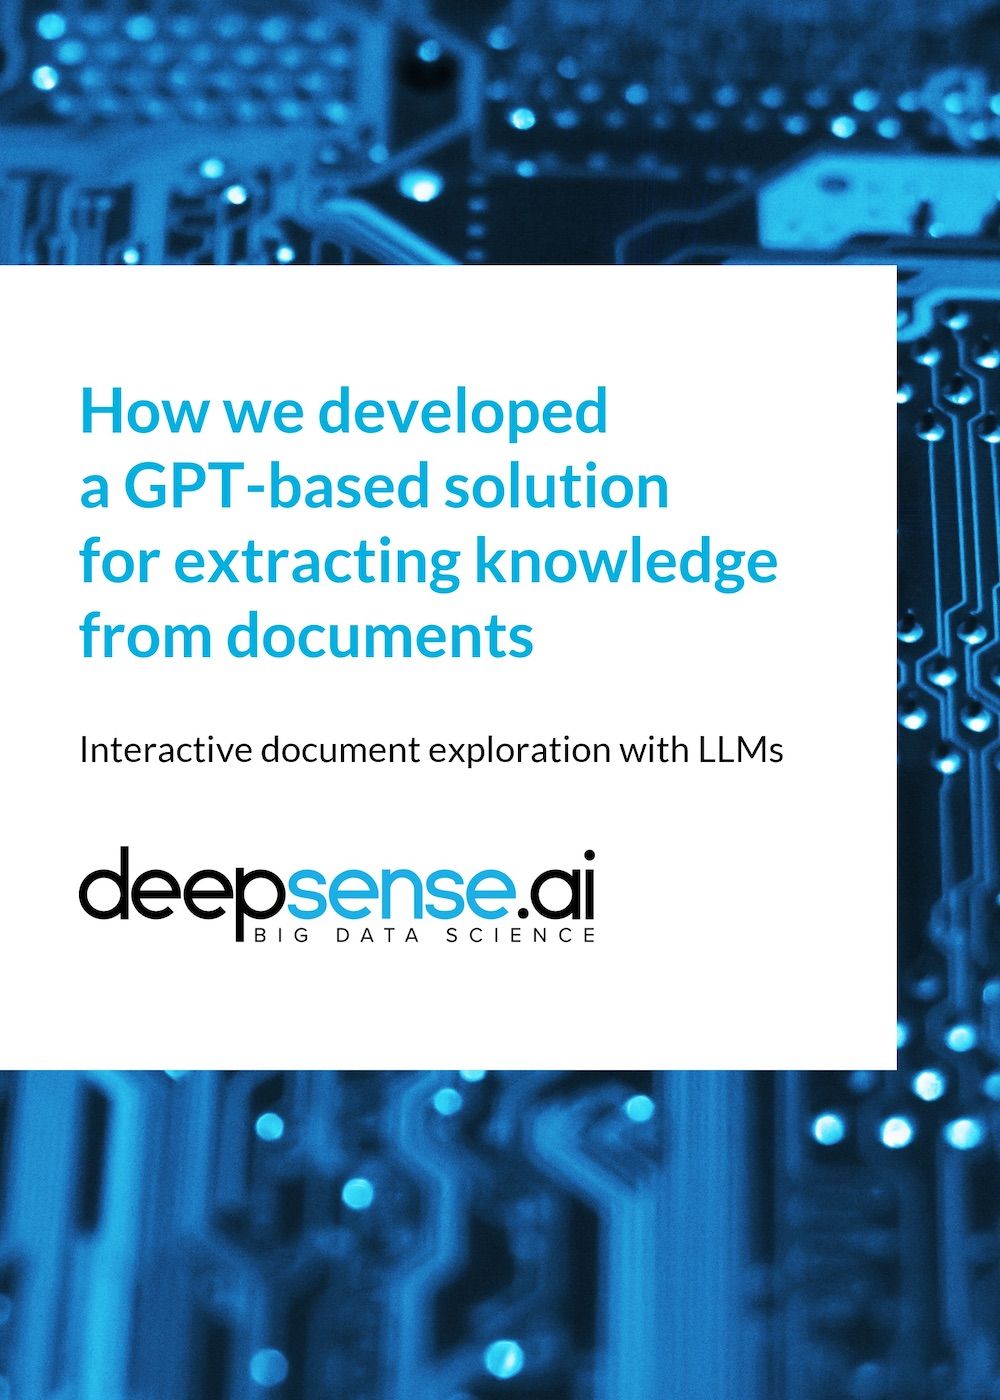 How we developed a GPT-based solution for extracting knowledge from documents